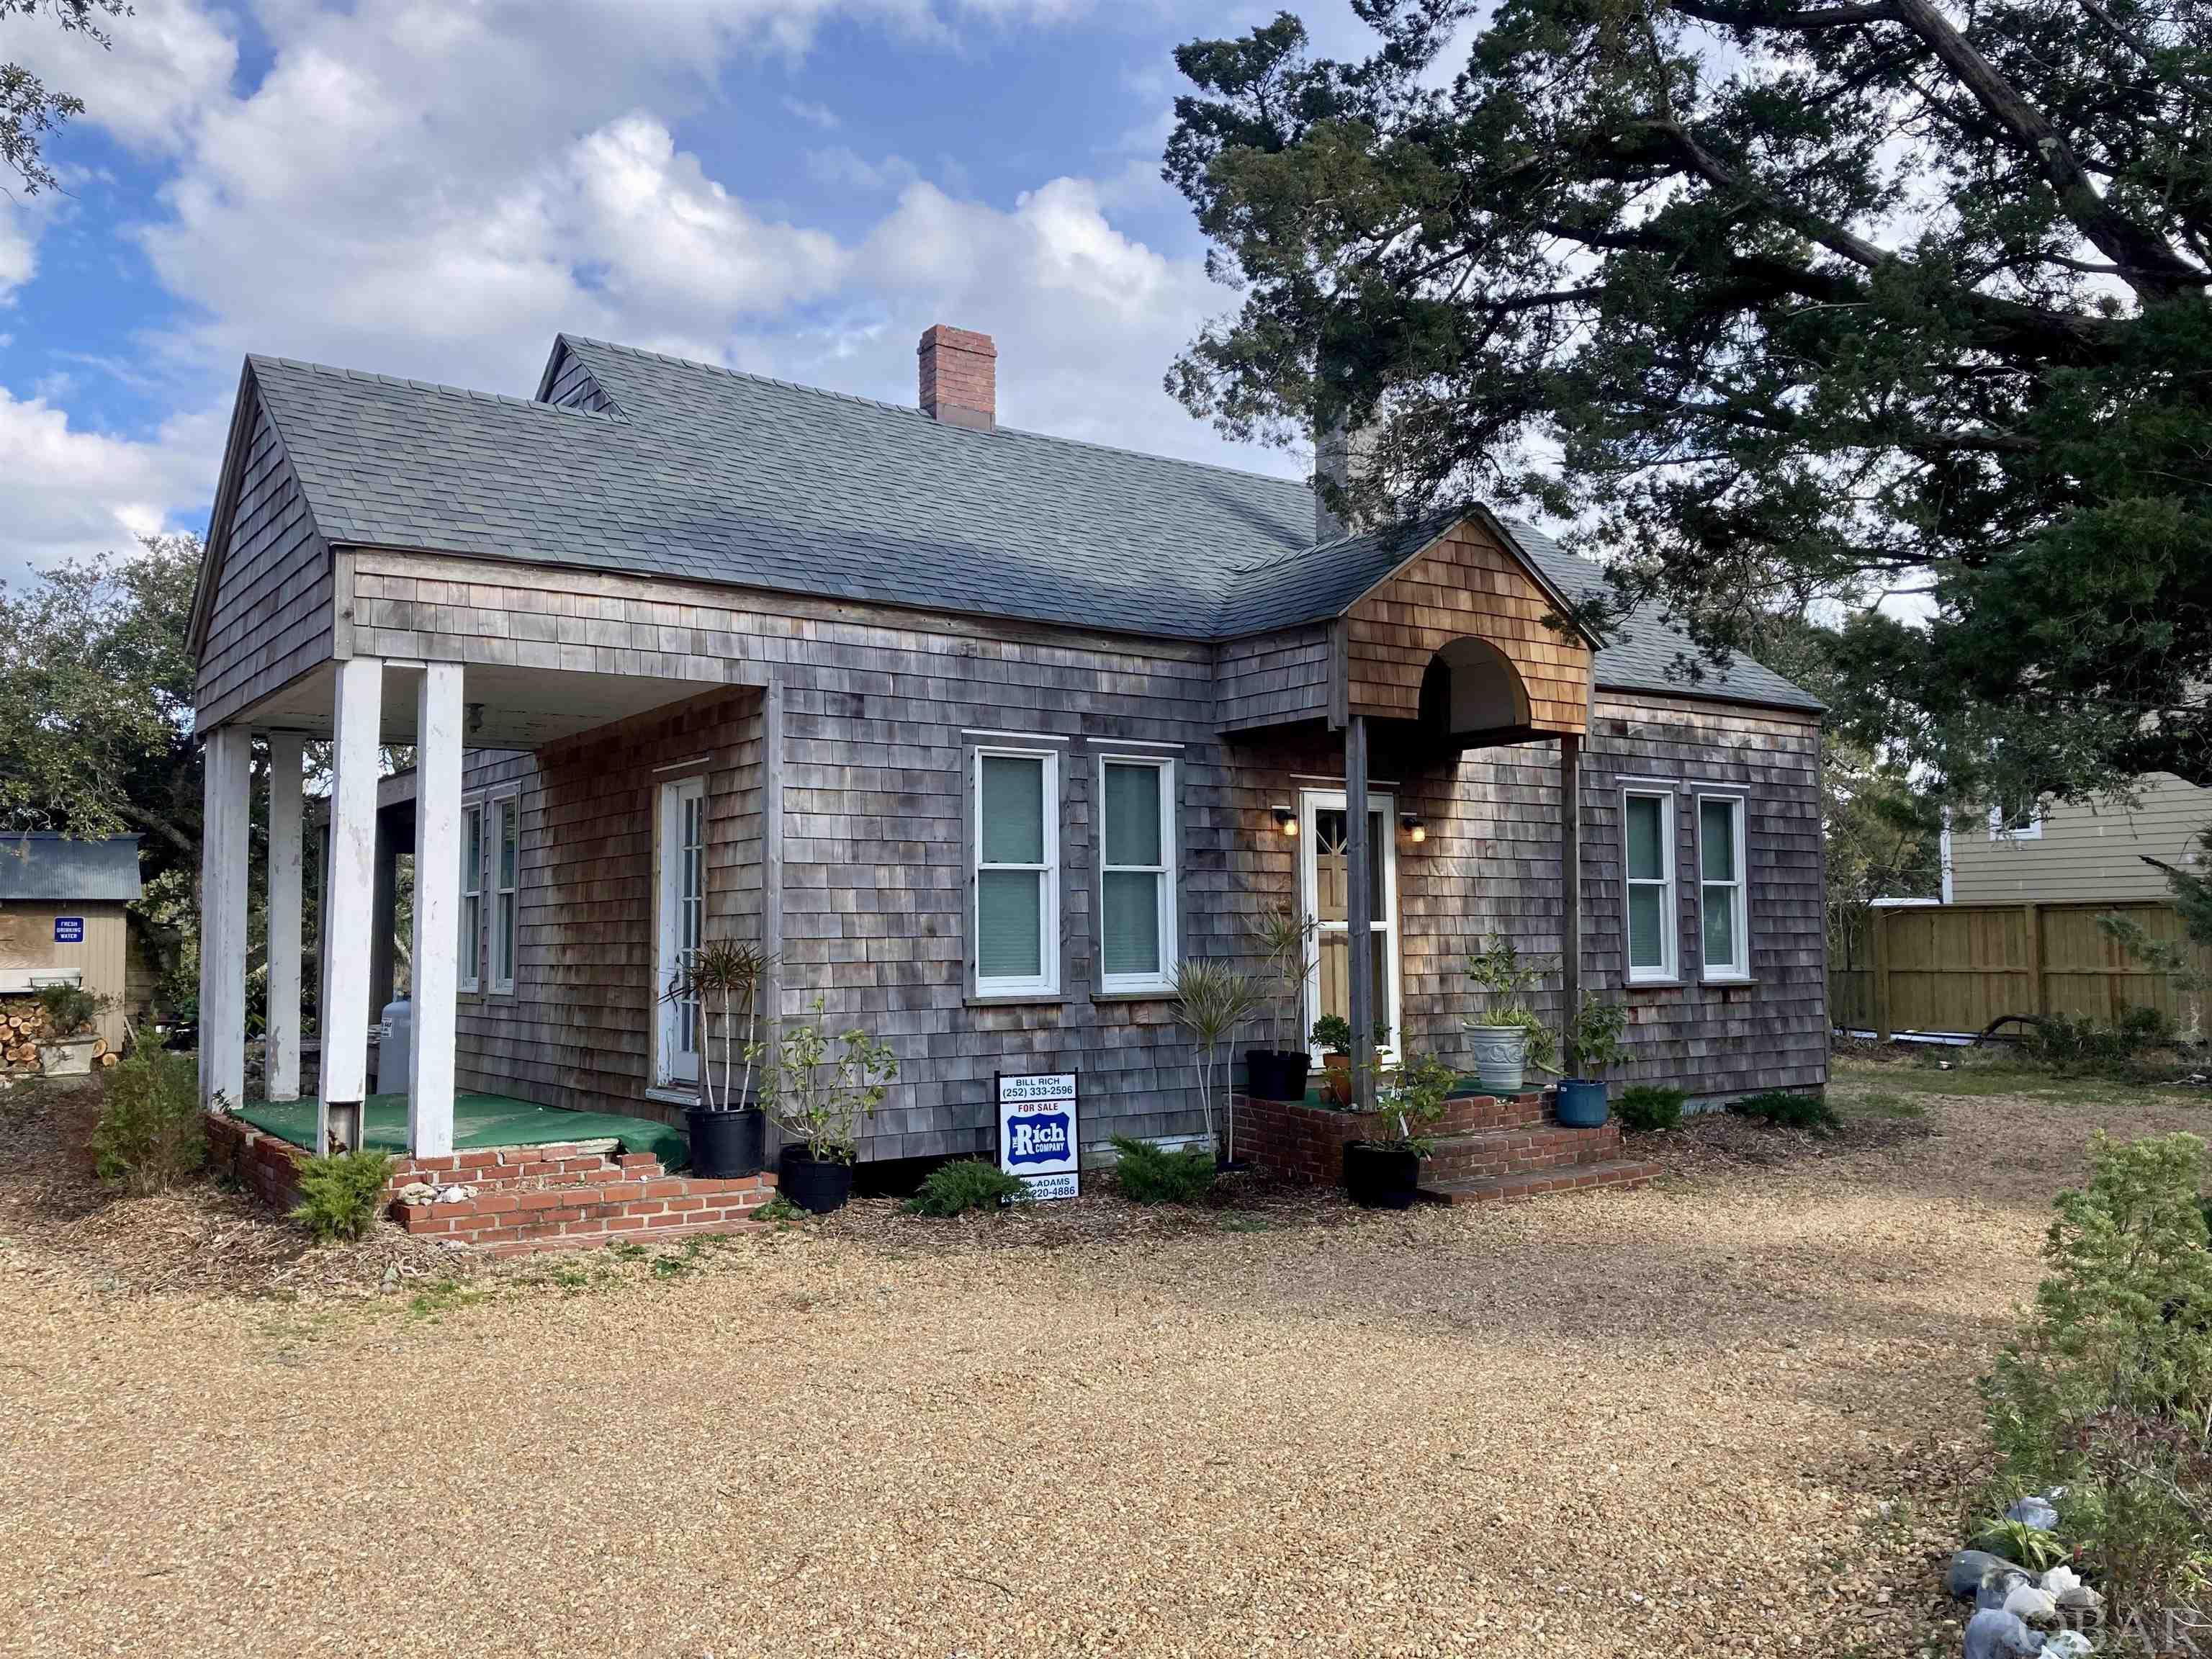 This historic Ocracoke home was recently remodeled inside and out and boasts meticulously cared for gardens. Brand new cedar shake siding, wood floors, appliances, impact glass double hung Pella windows, insulation, electrical, and travertine tile and teak bathroom. An expansive living area welcomes you through the front door and empties onto an idyllic back porch that is perfect for relaxing and hosting. Within short walking distance of coffee shops, the harbor, and Ocracoke's finest restaurants. This home would make an excellent vacation rental or year-round residence. Large lot of over 8,000 sq ft. Upstairs is currently being finished creating a master suite with full bath and a large private balcony. The entire house is also being upgraded with the addition of central air and heat.  Other upgrades include a new roof in 2017 and new hot water heater. A new 3 bedroom septic system is currently being installed. This home is approved on the FEMA list to be raised and this can be transferred to the buyer at closing.